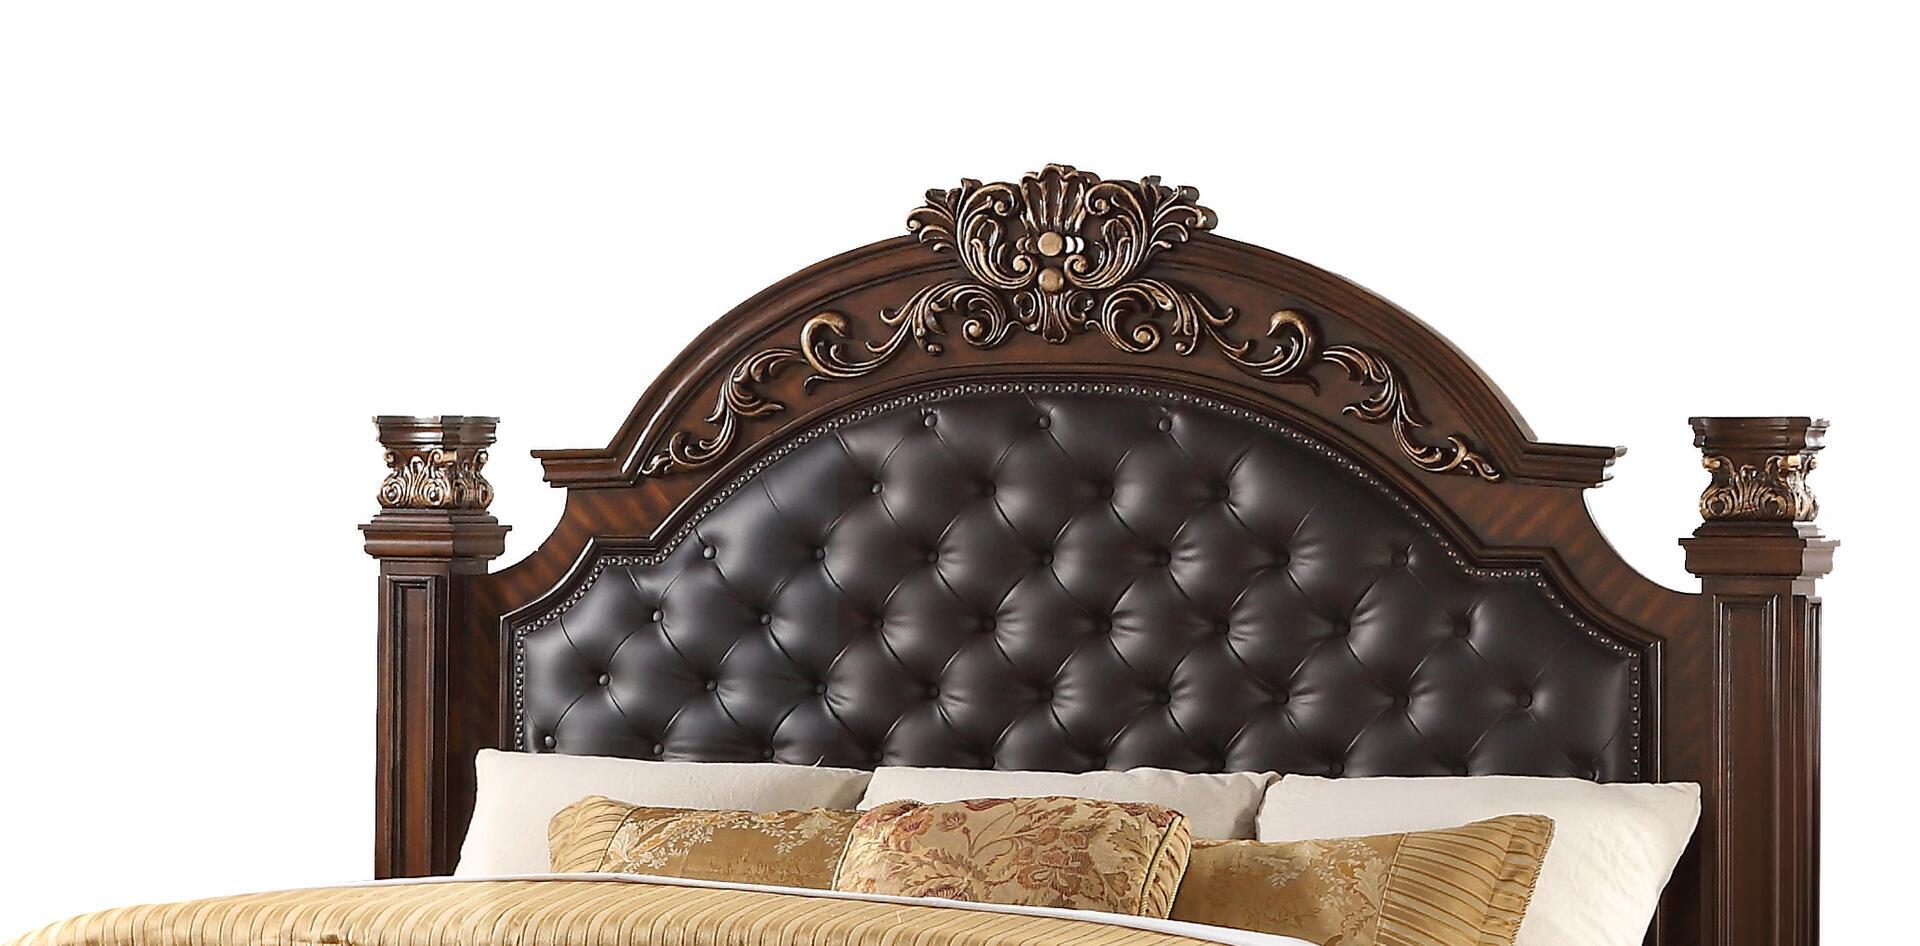 

    
Cherry Finish Wood Tufted Hedboard Queen Panel Bed Traditional Cosmos Furniture Aspen
